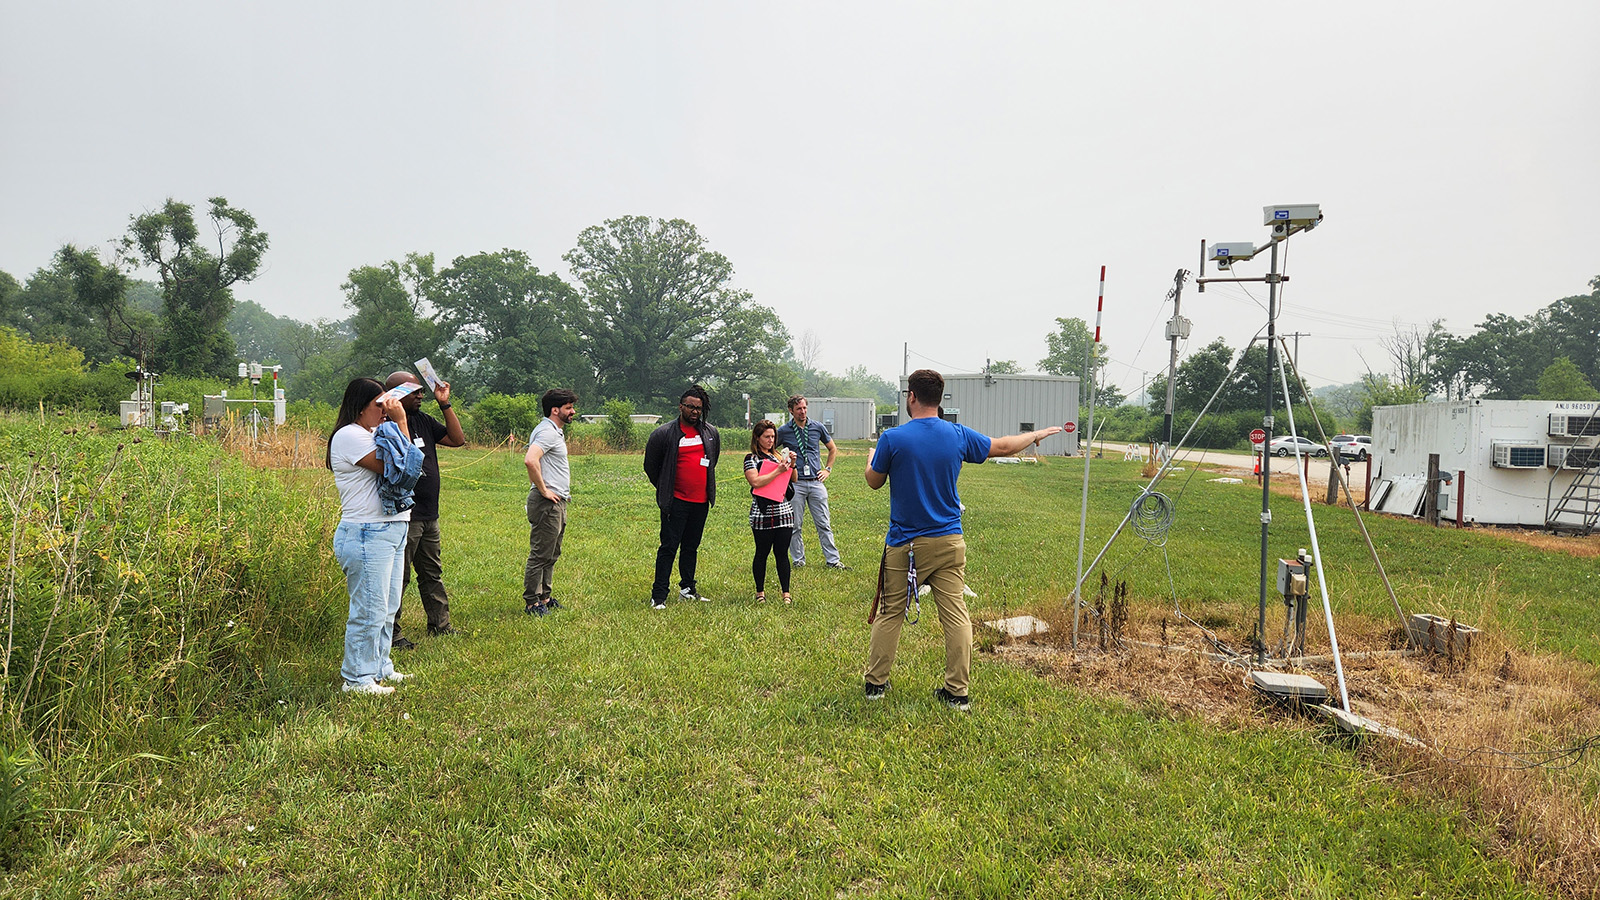 In the third week of the teacher institute, teachers had the chance to visit Argonne National Laboratory and observe researchers’ data collection in-person.